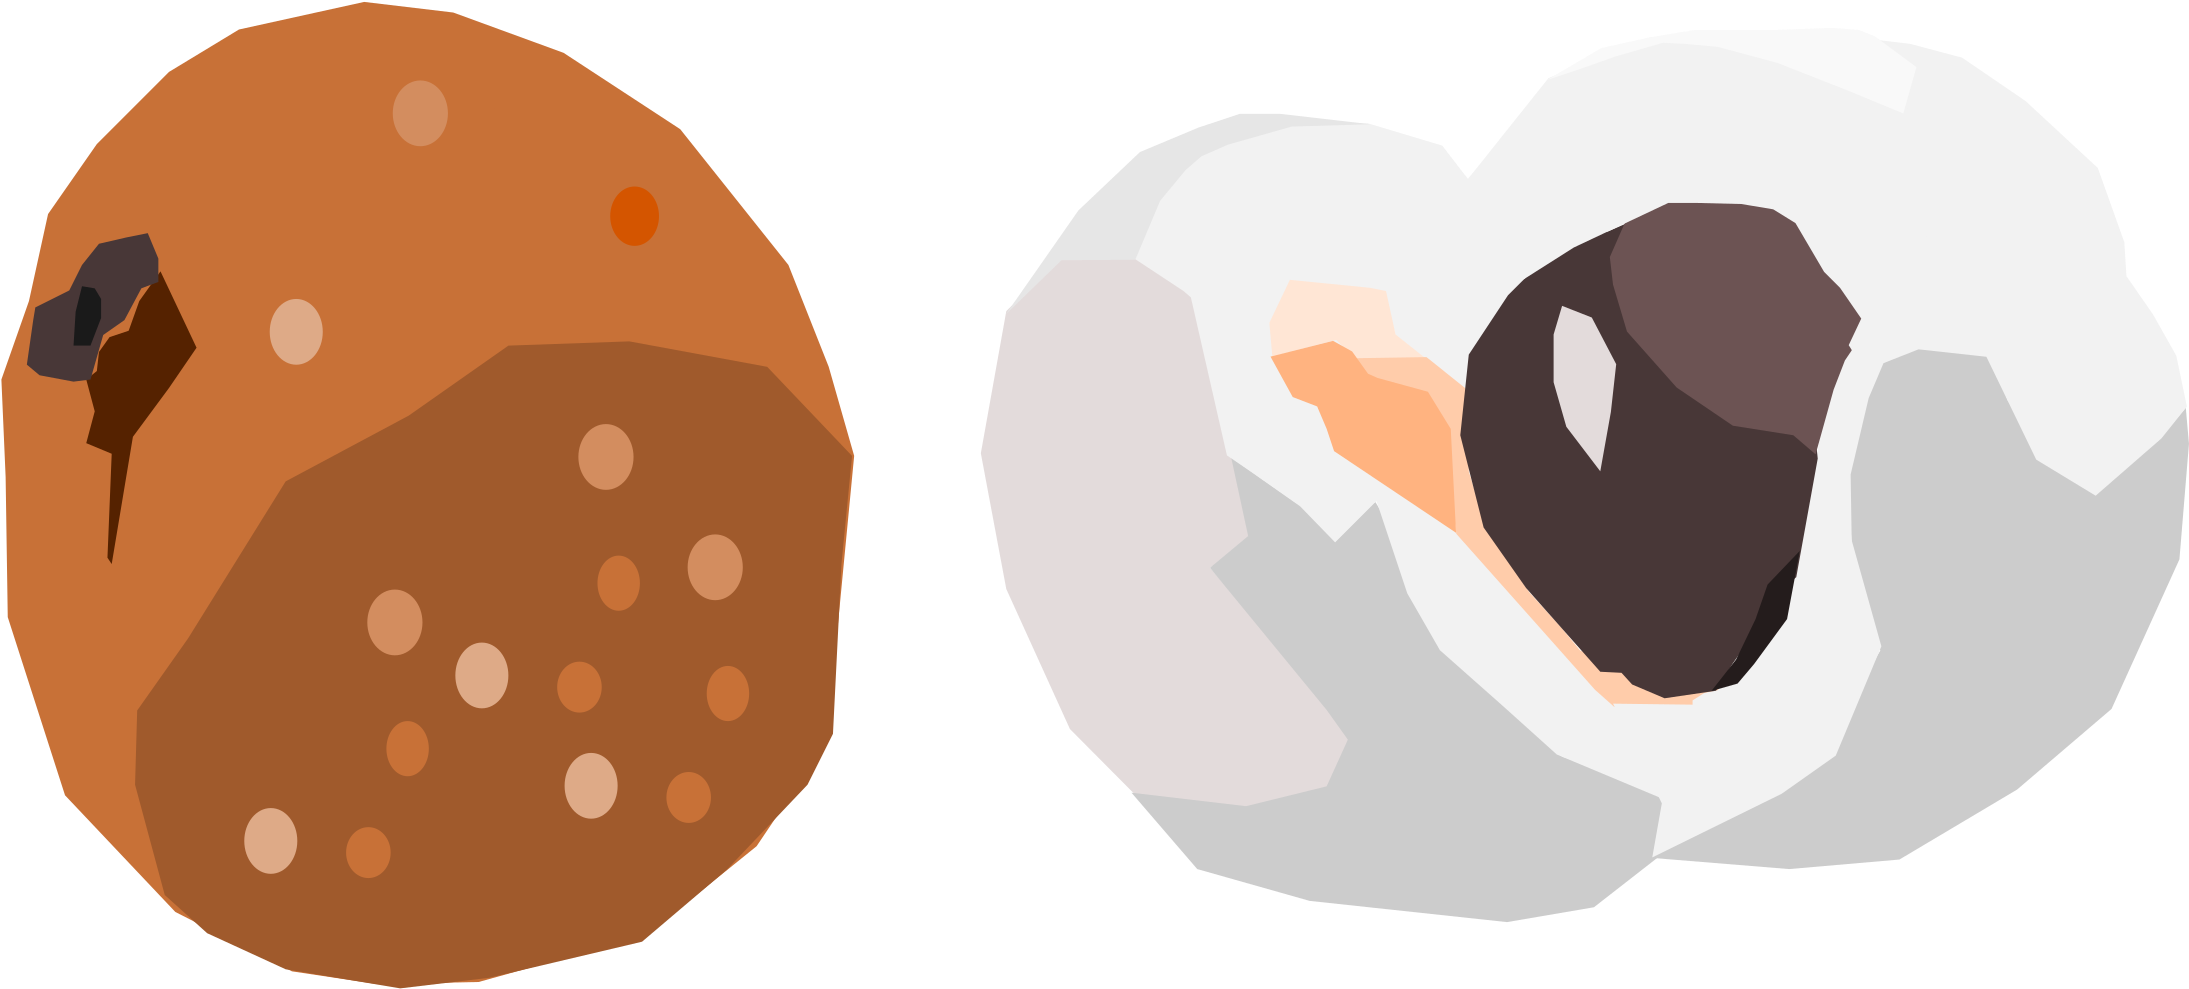 A Couple Of Eggs In A Circle